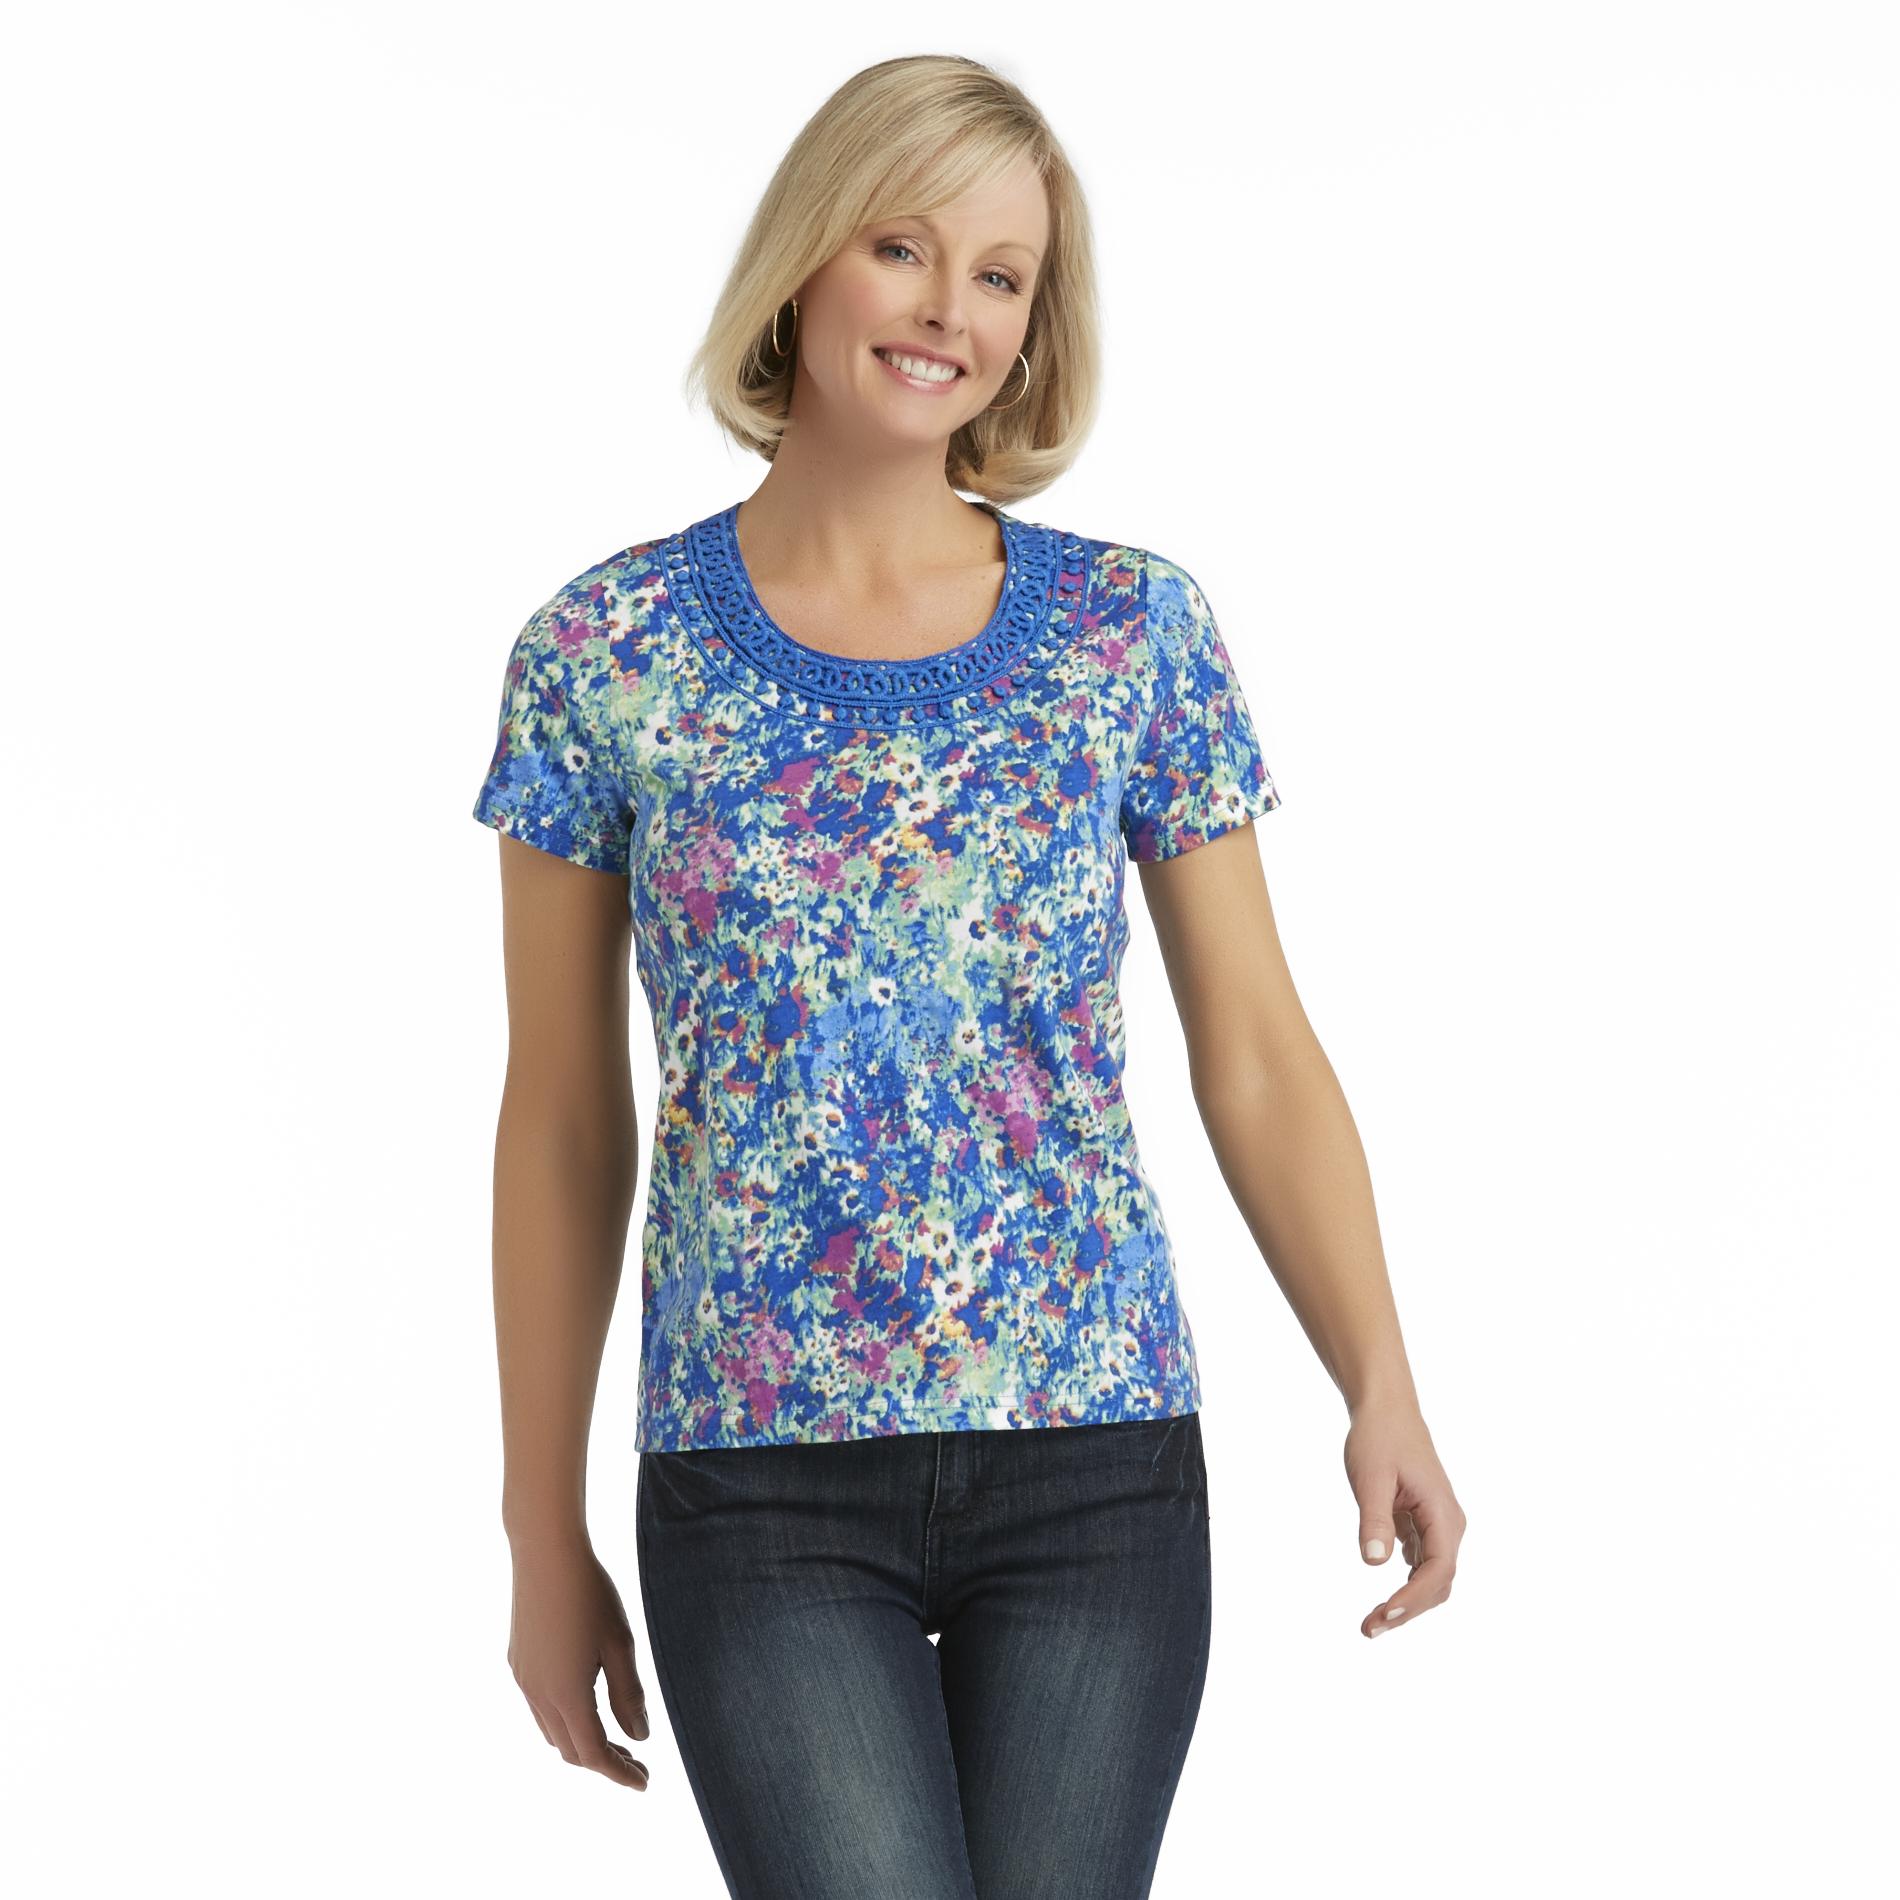 Basic Editions Women's Embellished Neck Knit Top - Floral